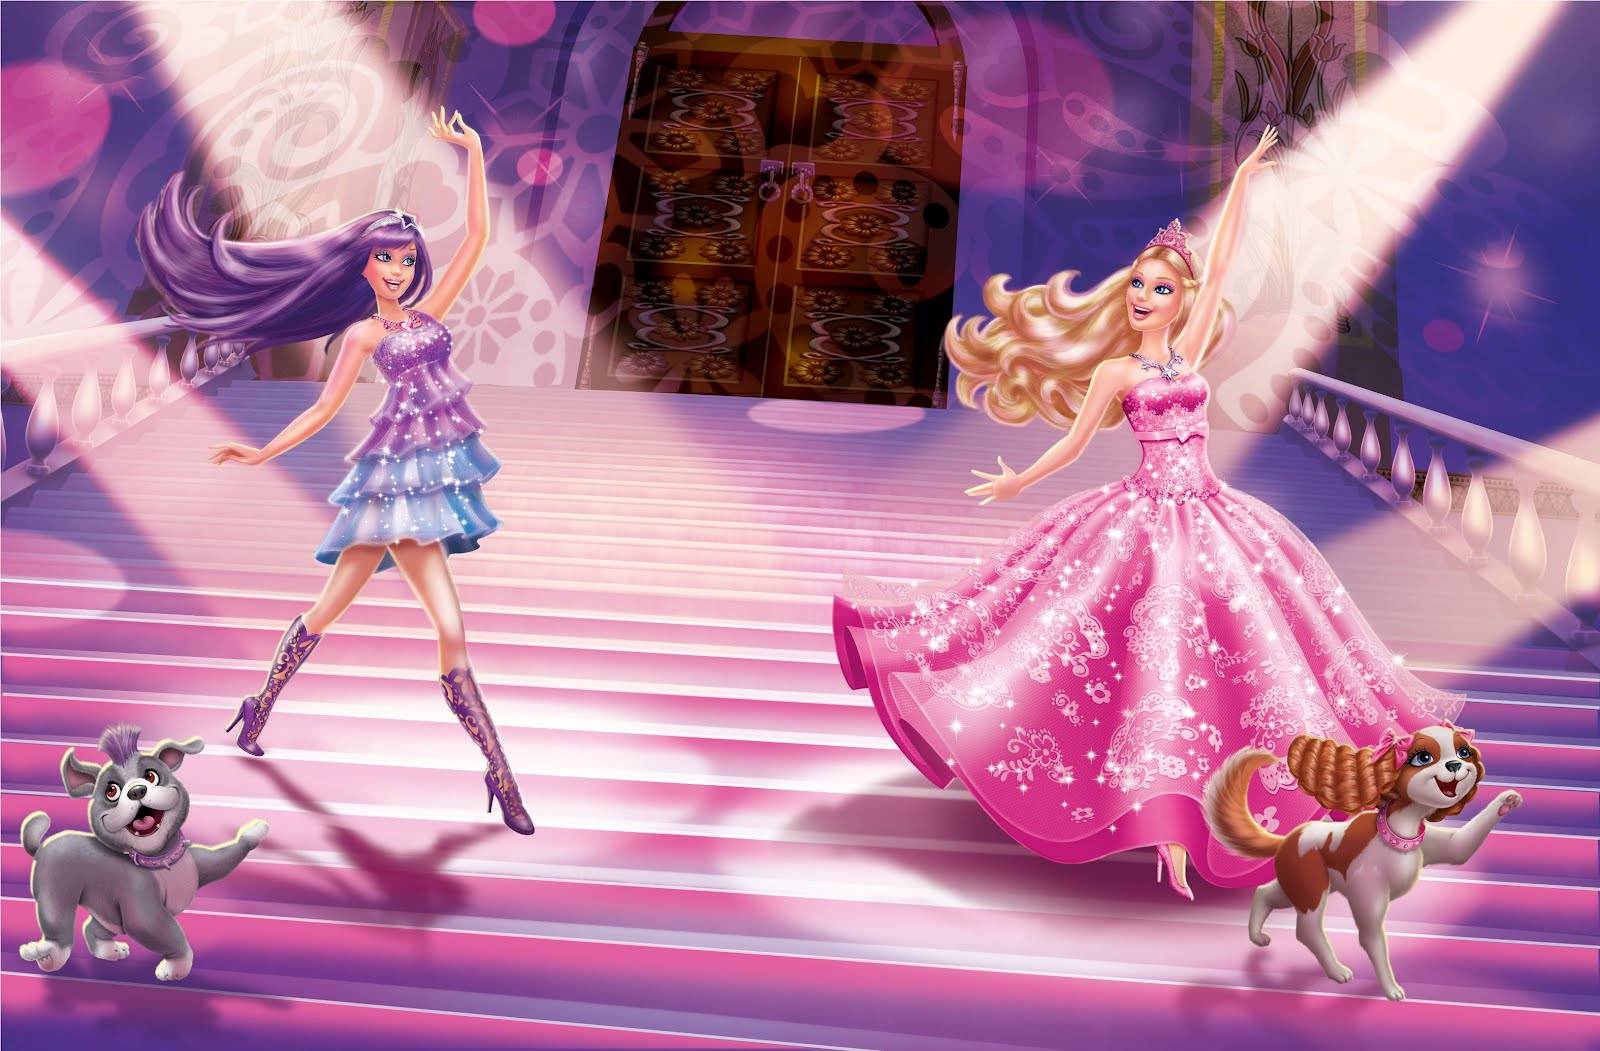 Pictures Of Popstar In High Quality - Barbie Princess And Popstar - HD Wallpaper 